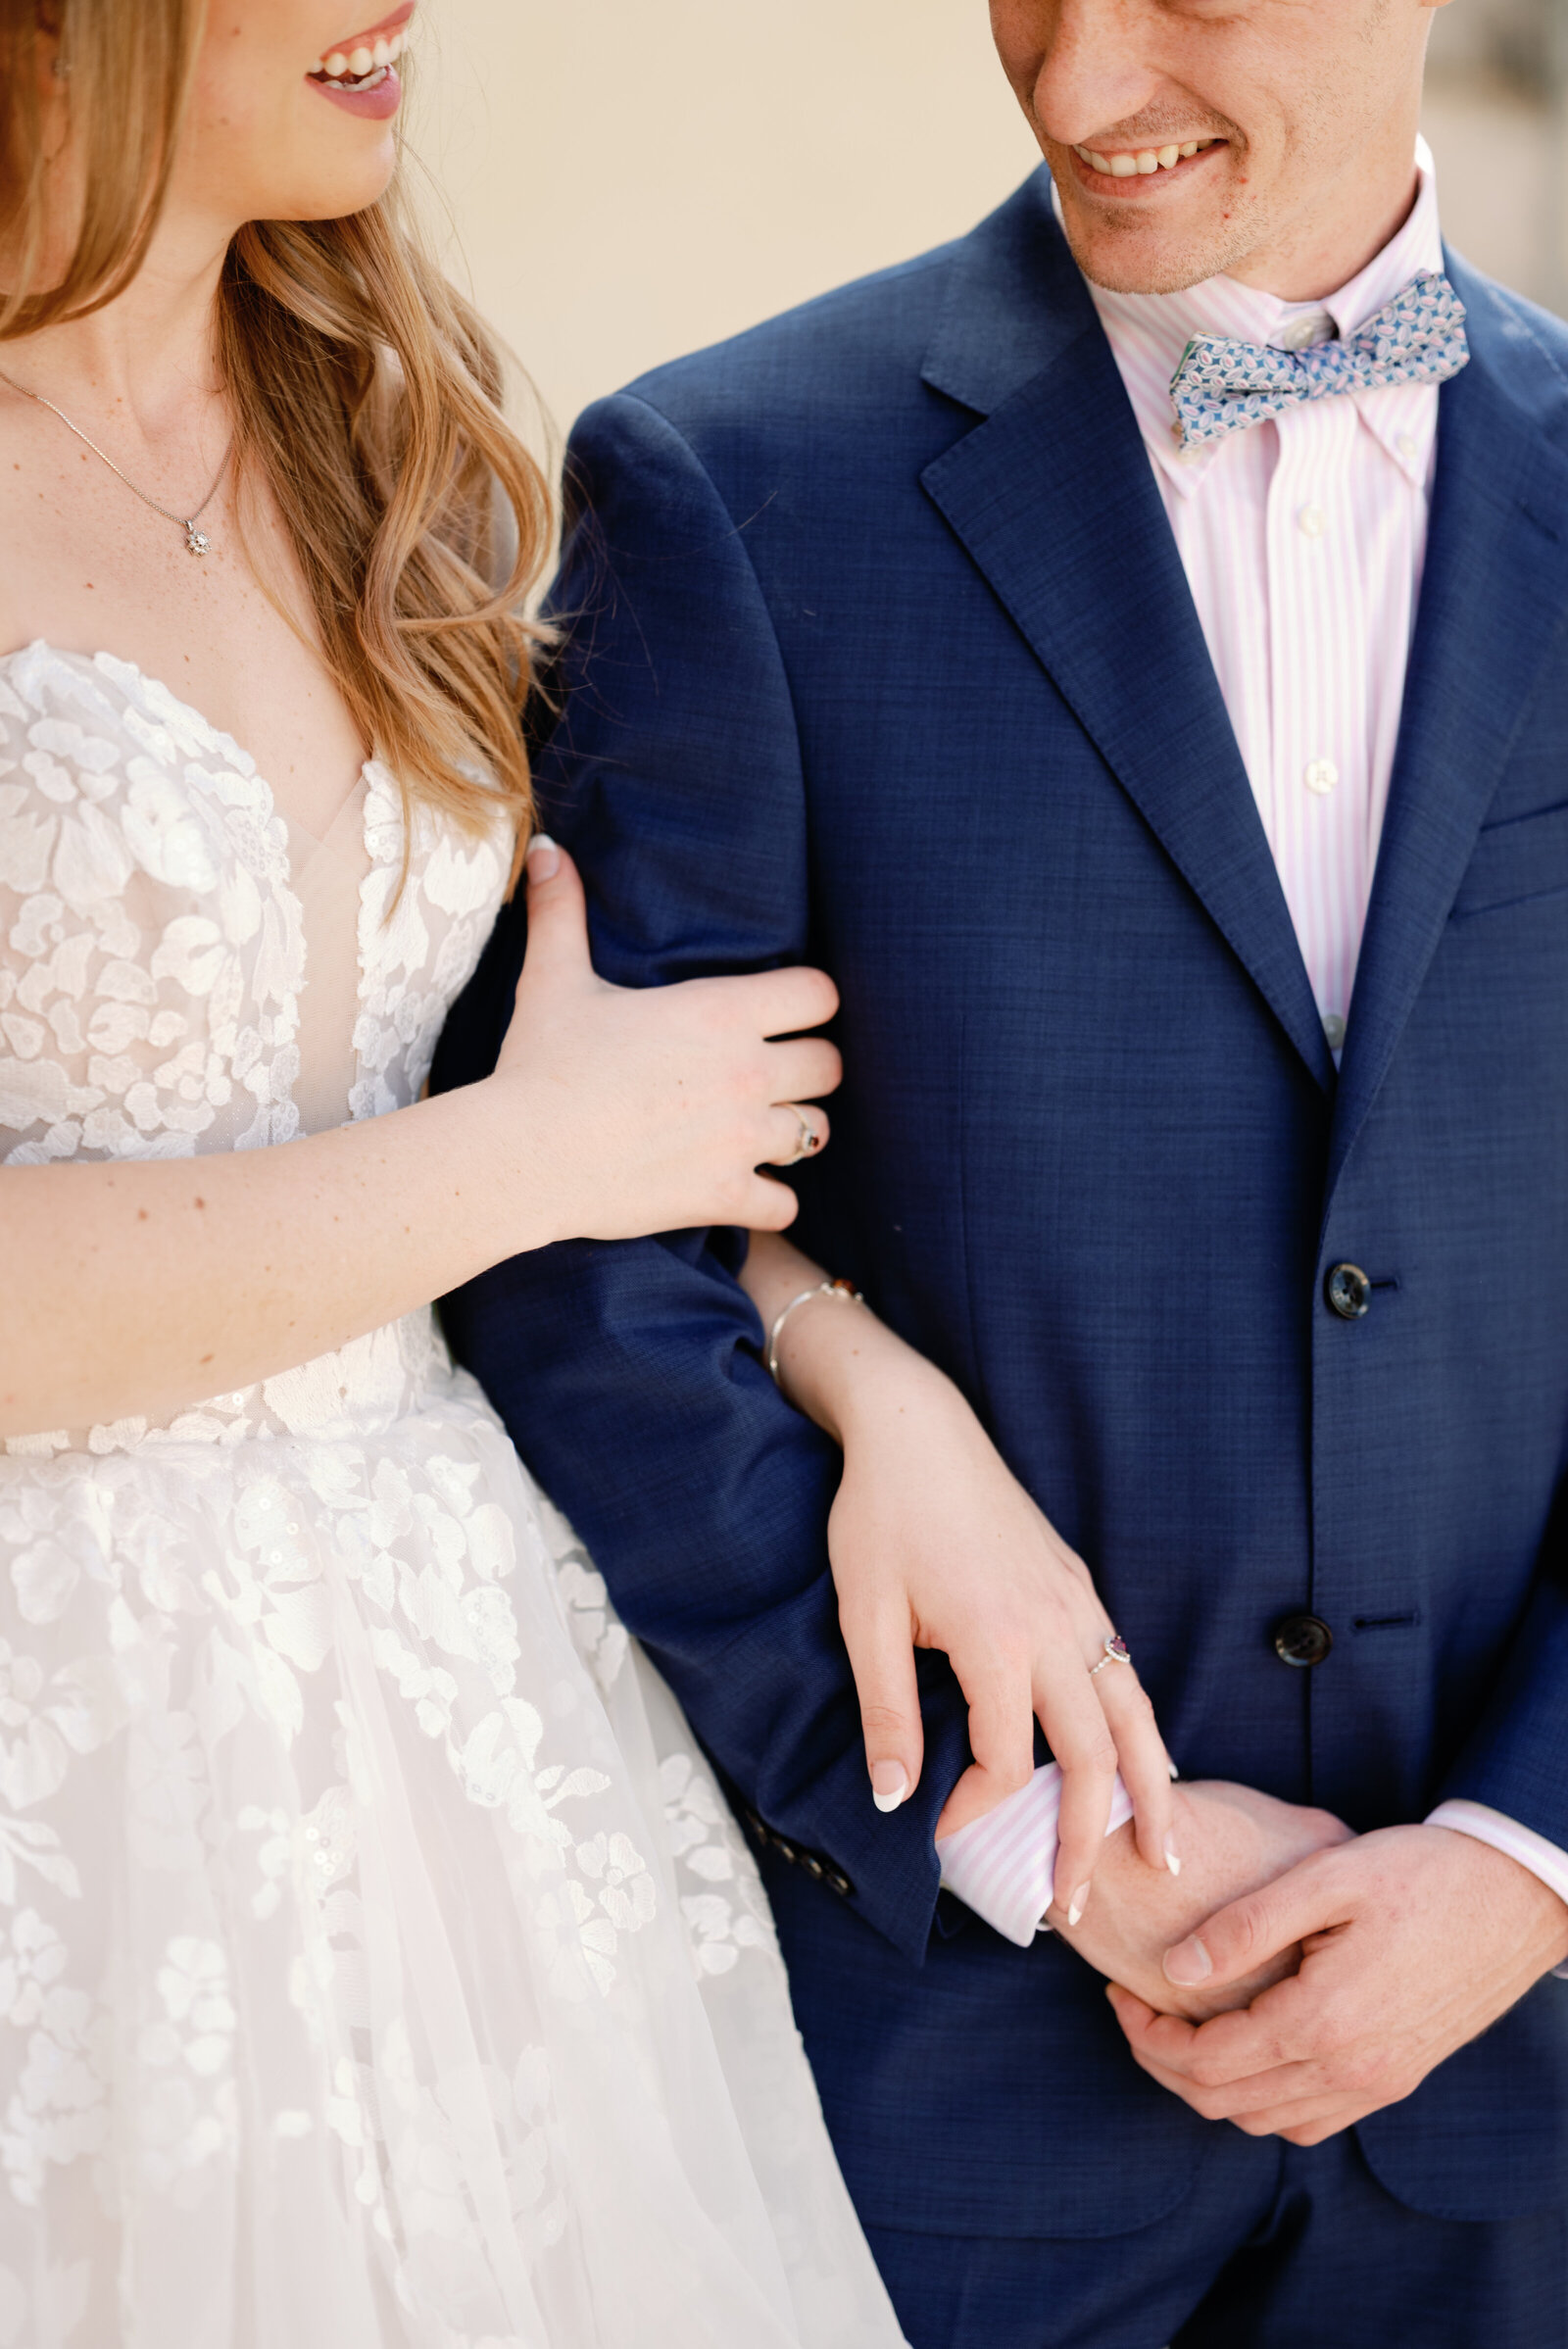 Close up of bride and grooms arms and hands together. Smiles on their faces